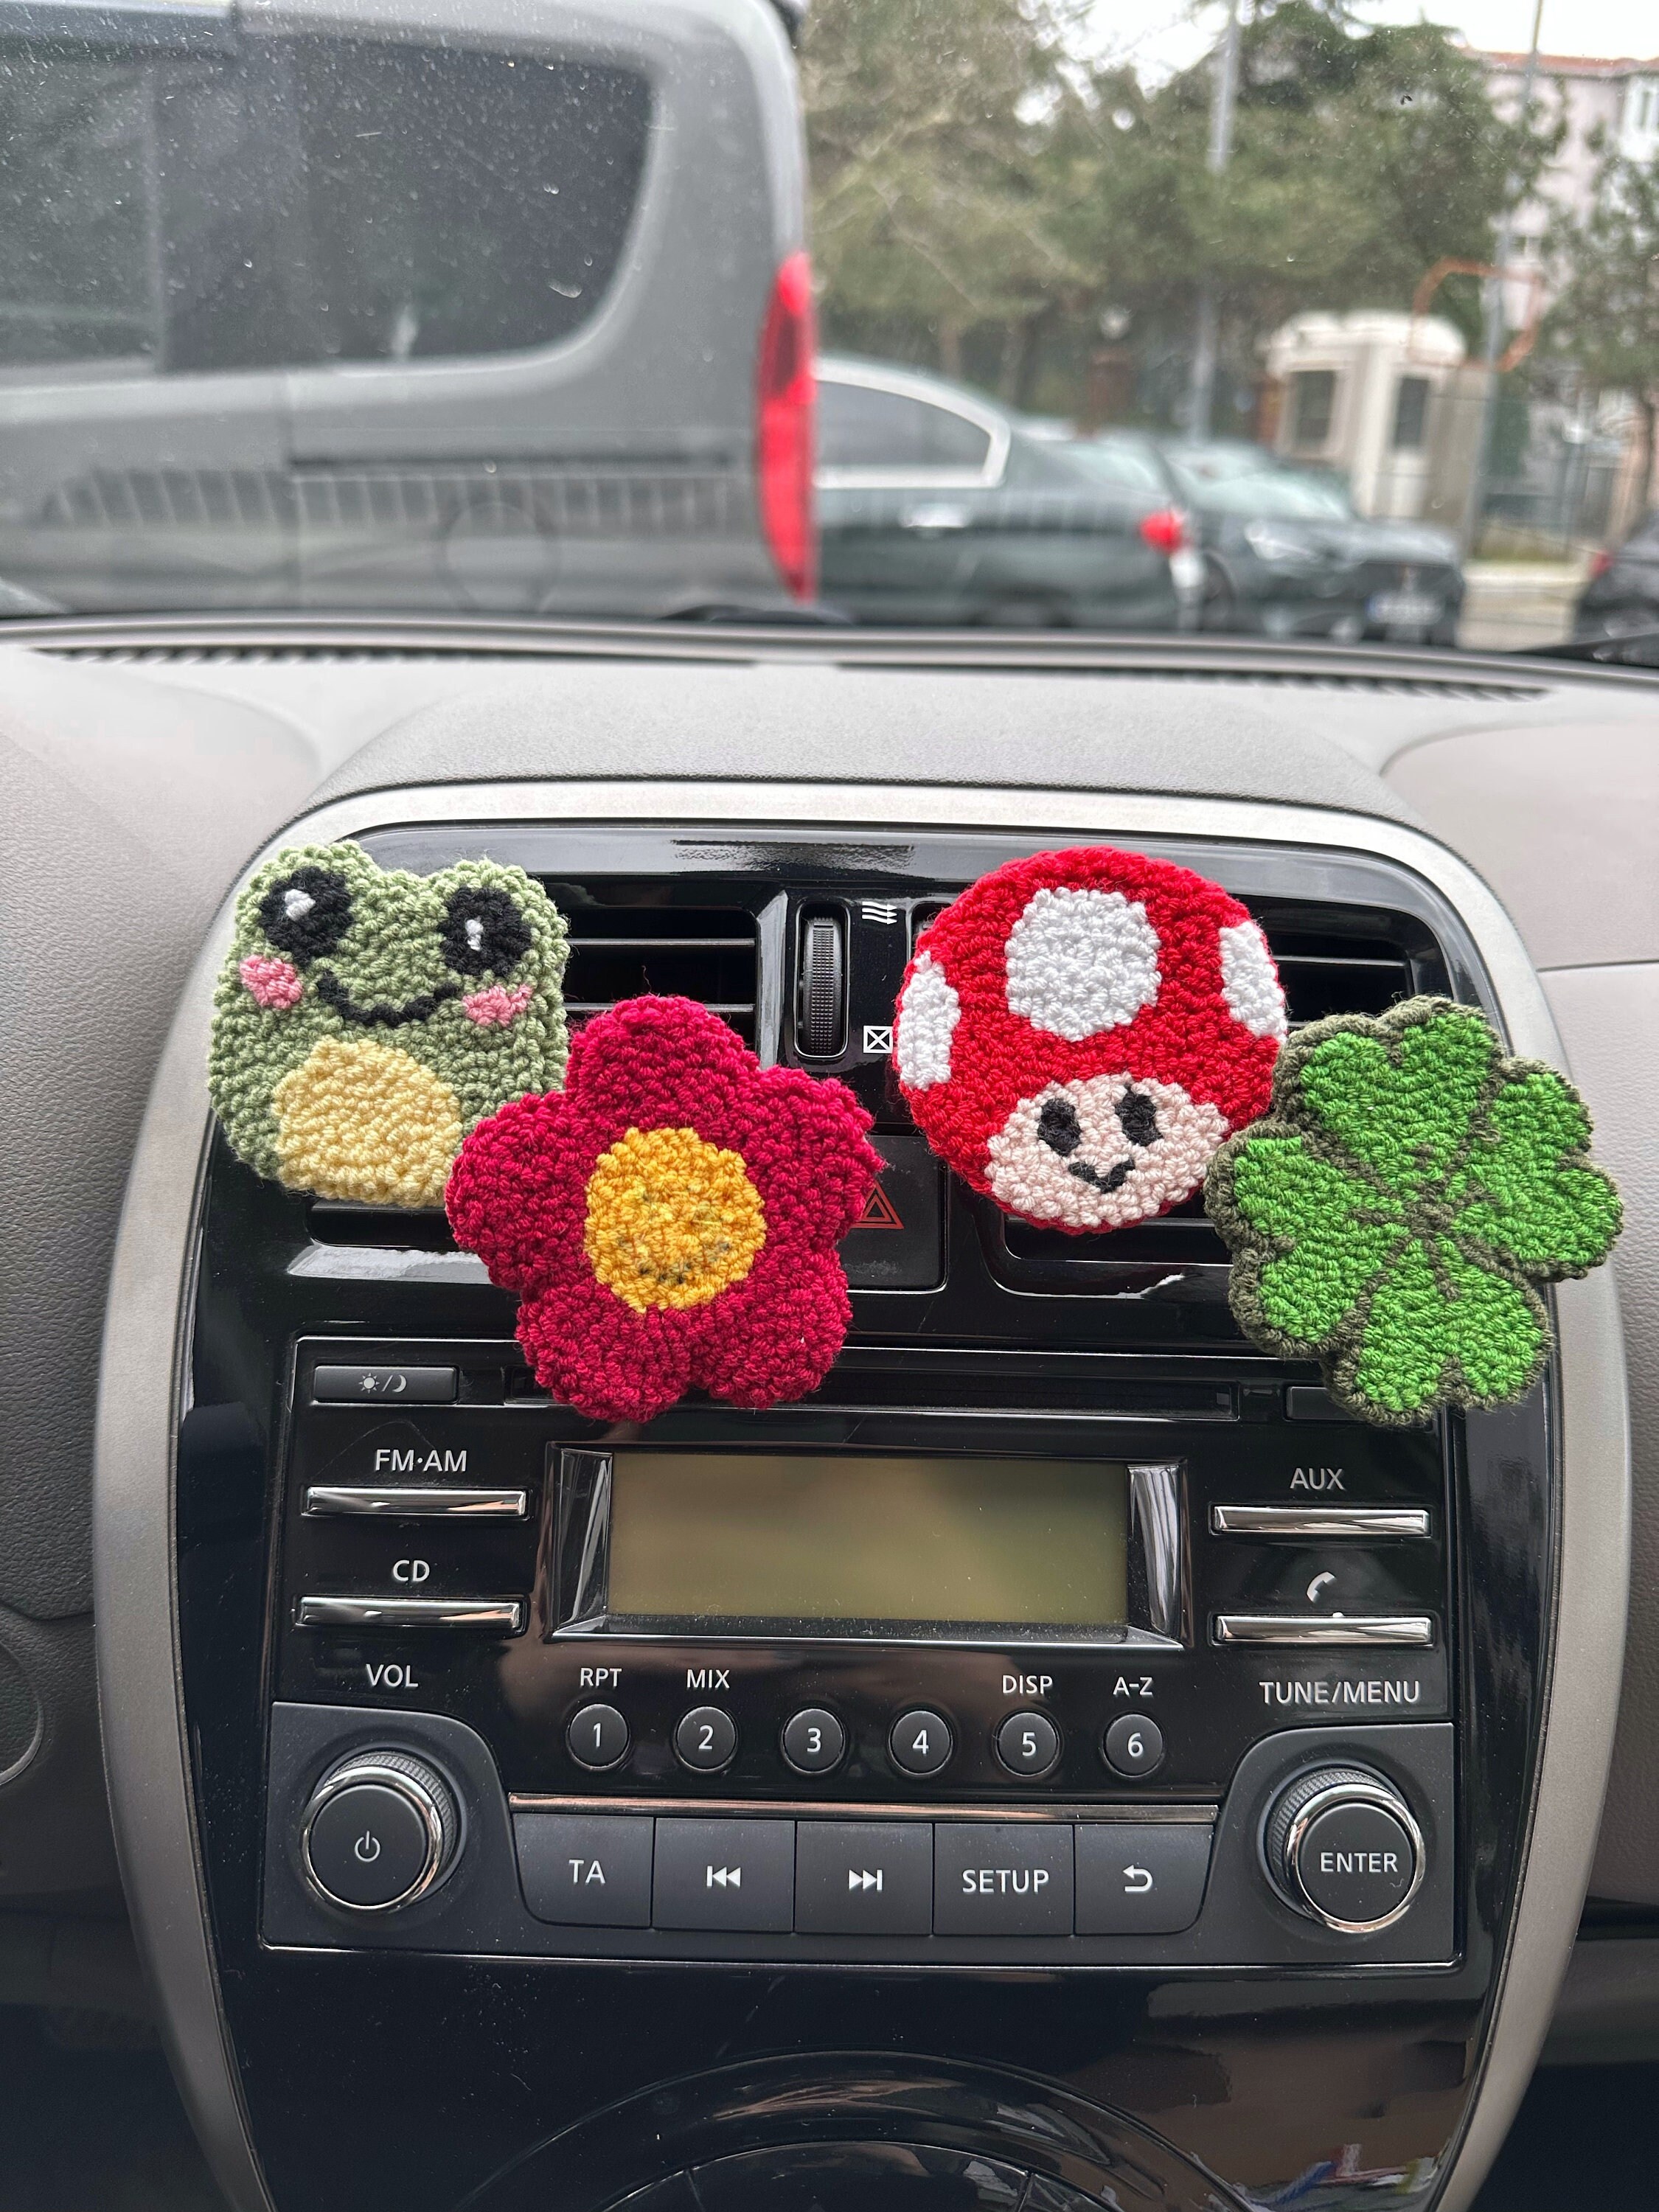 Handmade Car Air Vent Clip, Punch Needle Car Accessories, Cute and Funny  Air Vent Charm, New Driver Gift, Colorful Car Decor for Women 